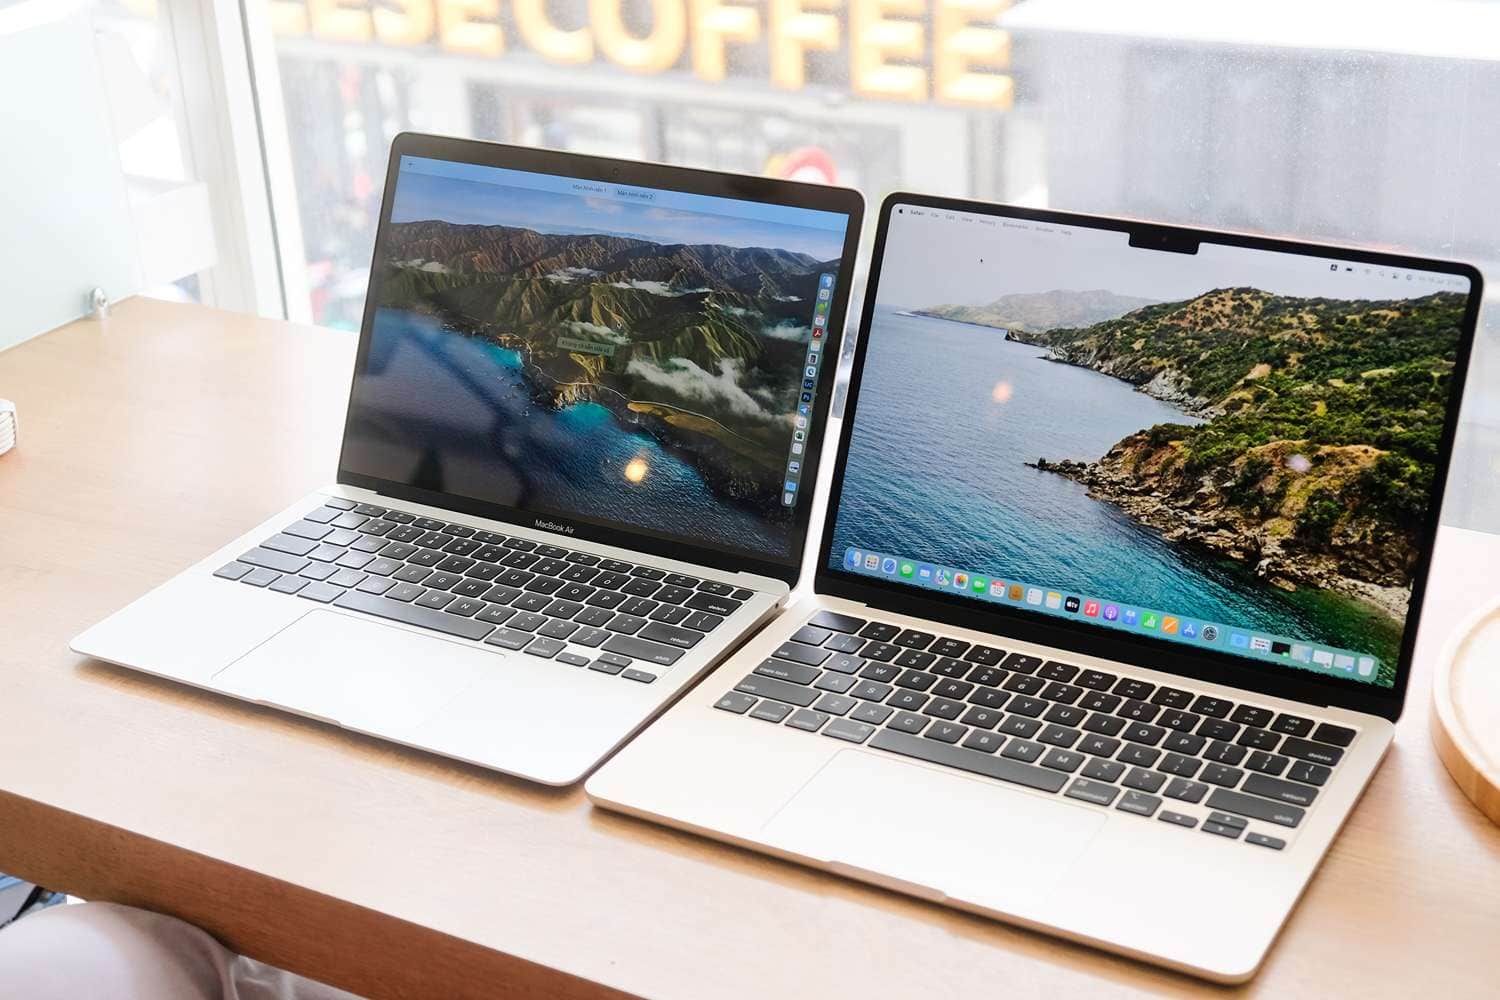 MacBook Pro or MacBook Air? Which One is Better?